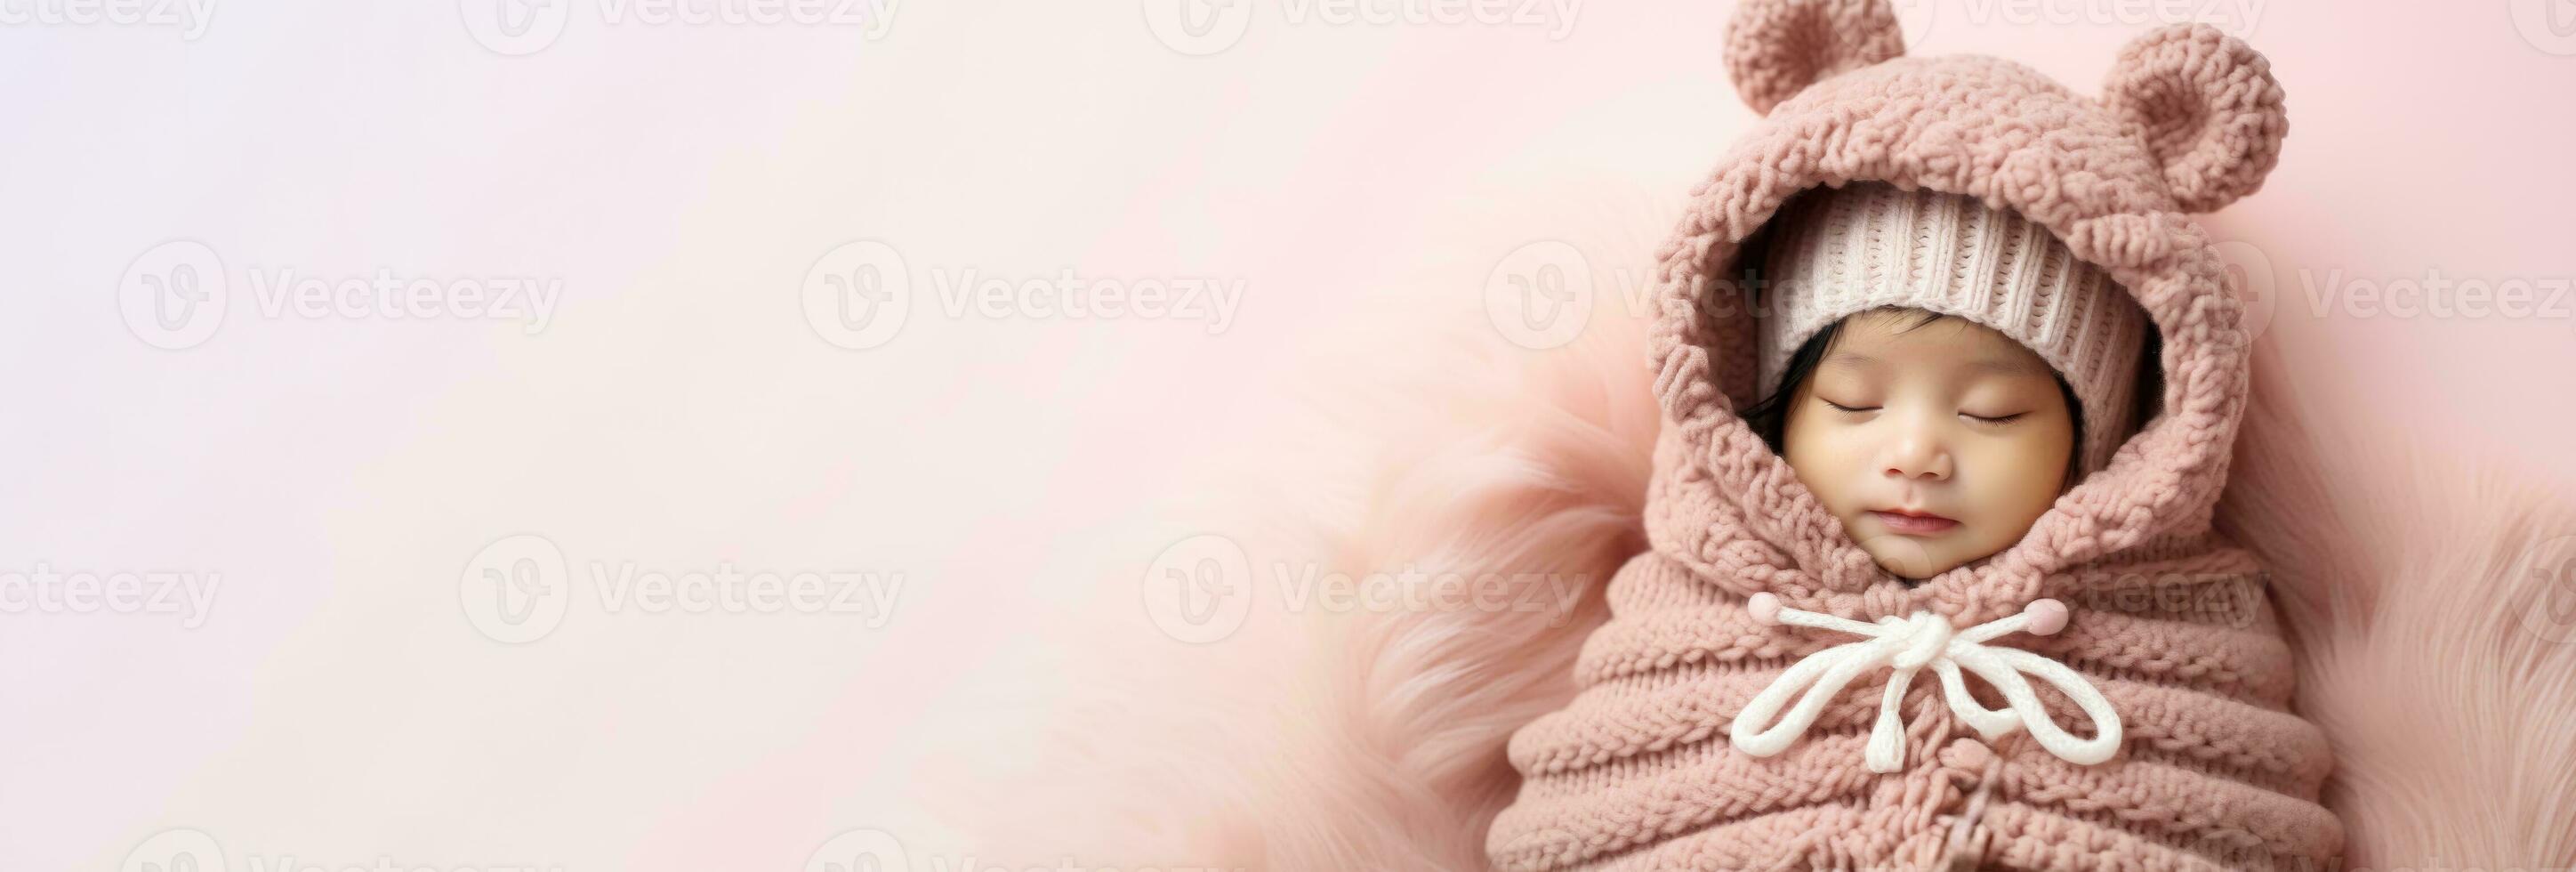 Newborn in full knitted cozy costume isolated on pastel background with a place for text photo